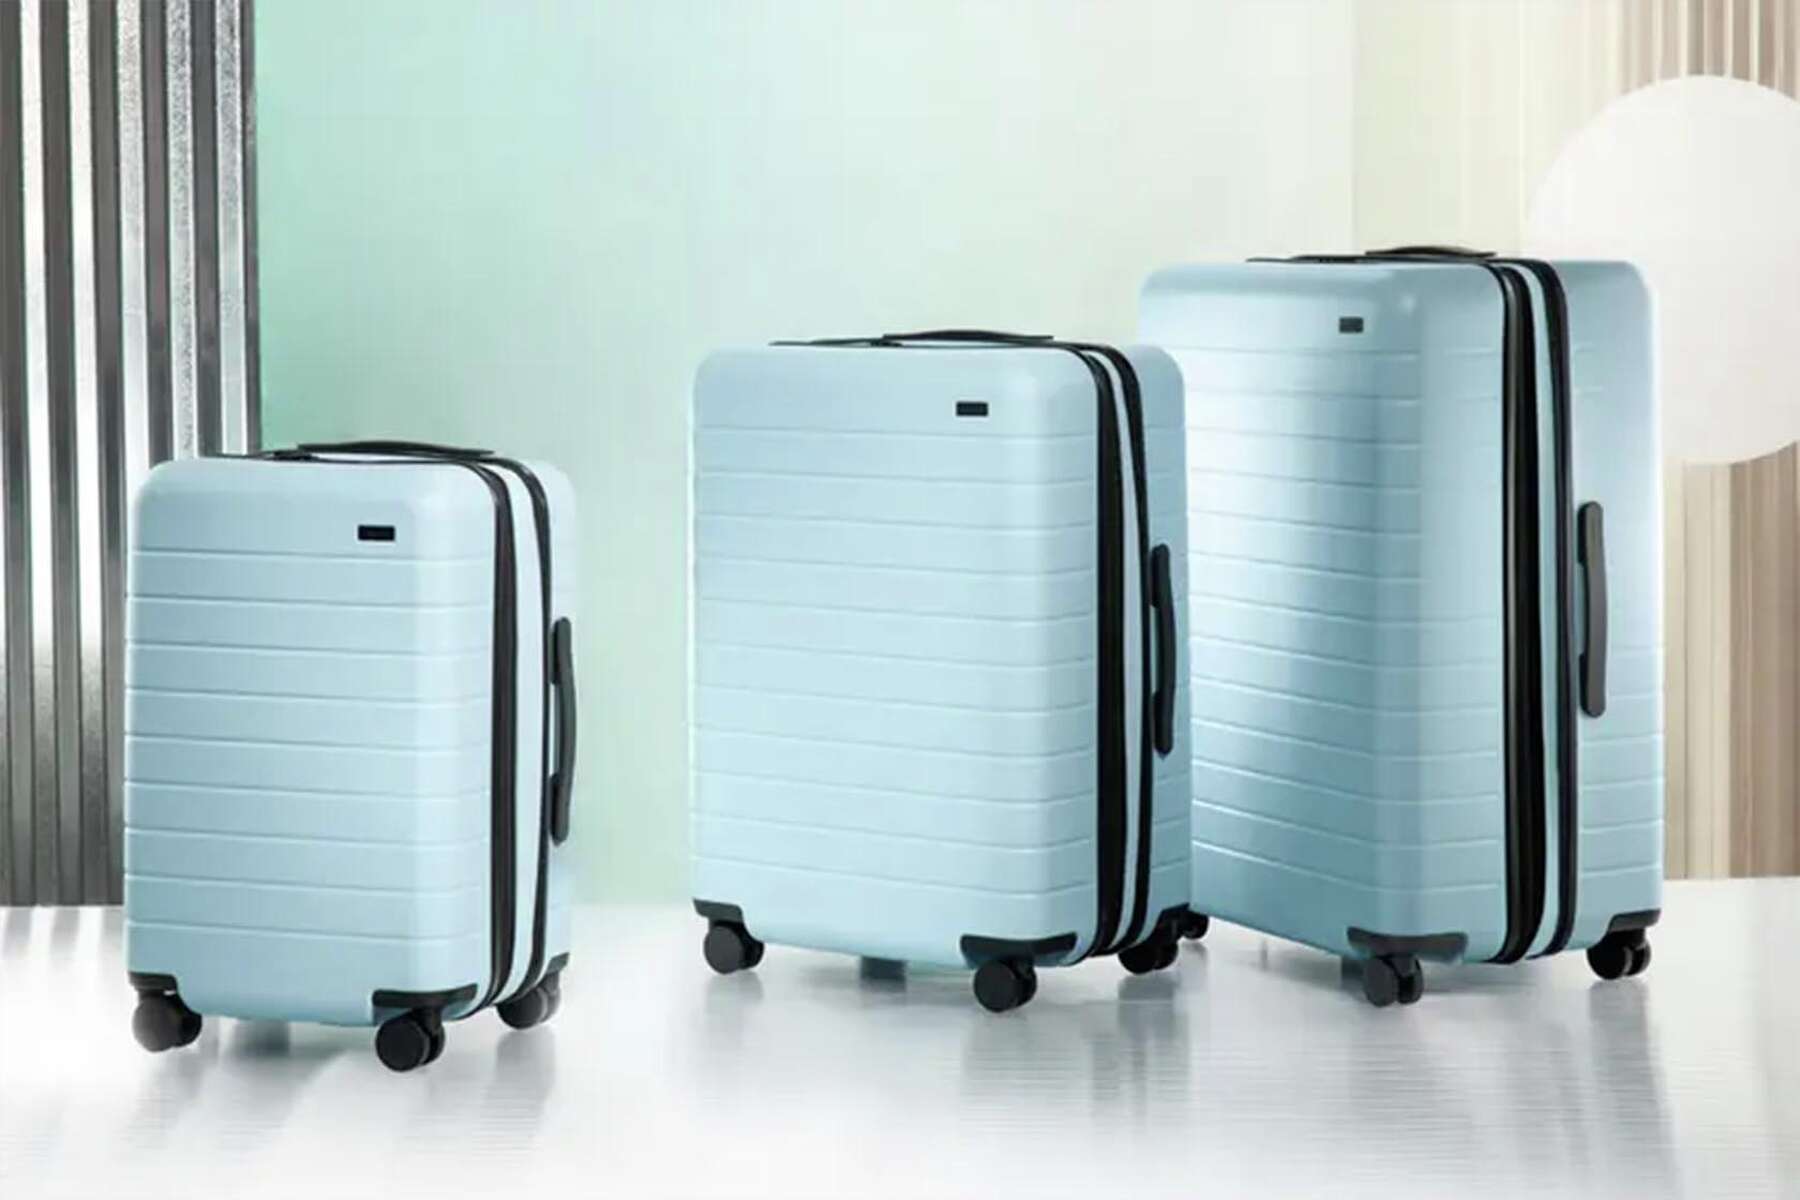 Never lose sight of your luggage with Away's new limited-edition colors